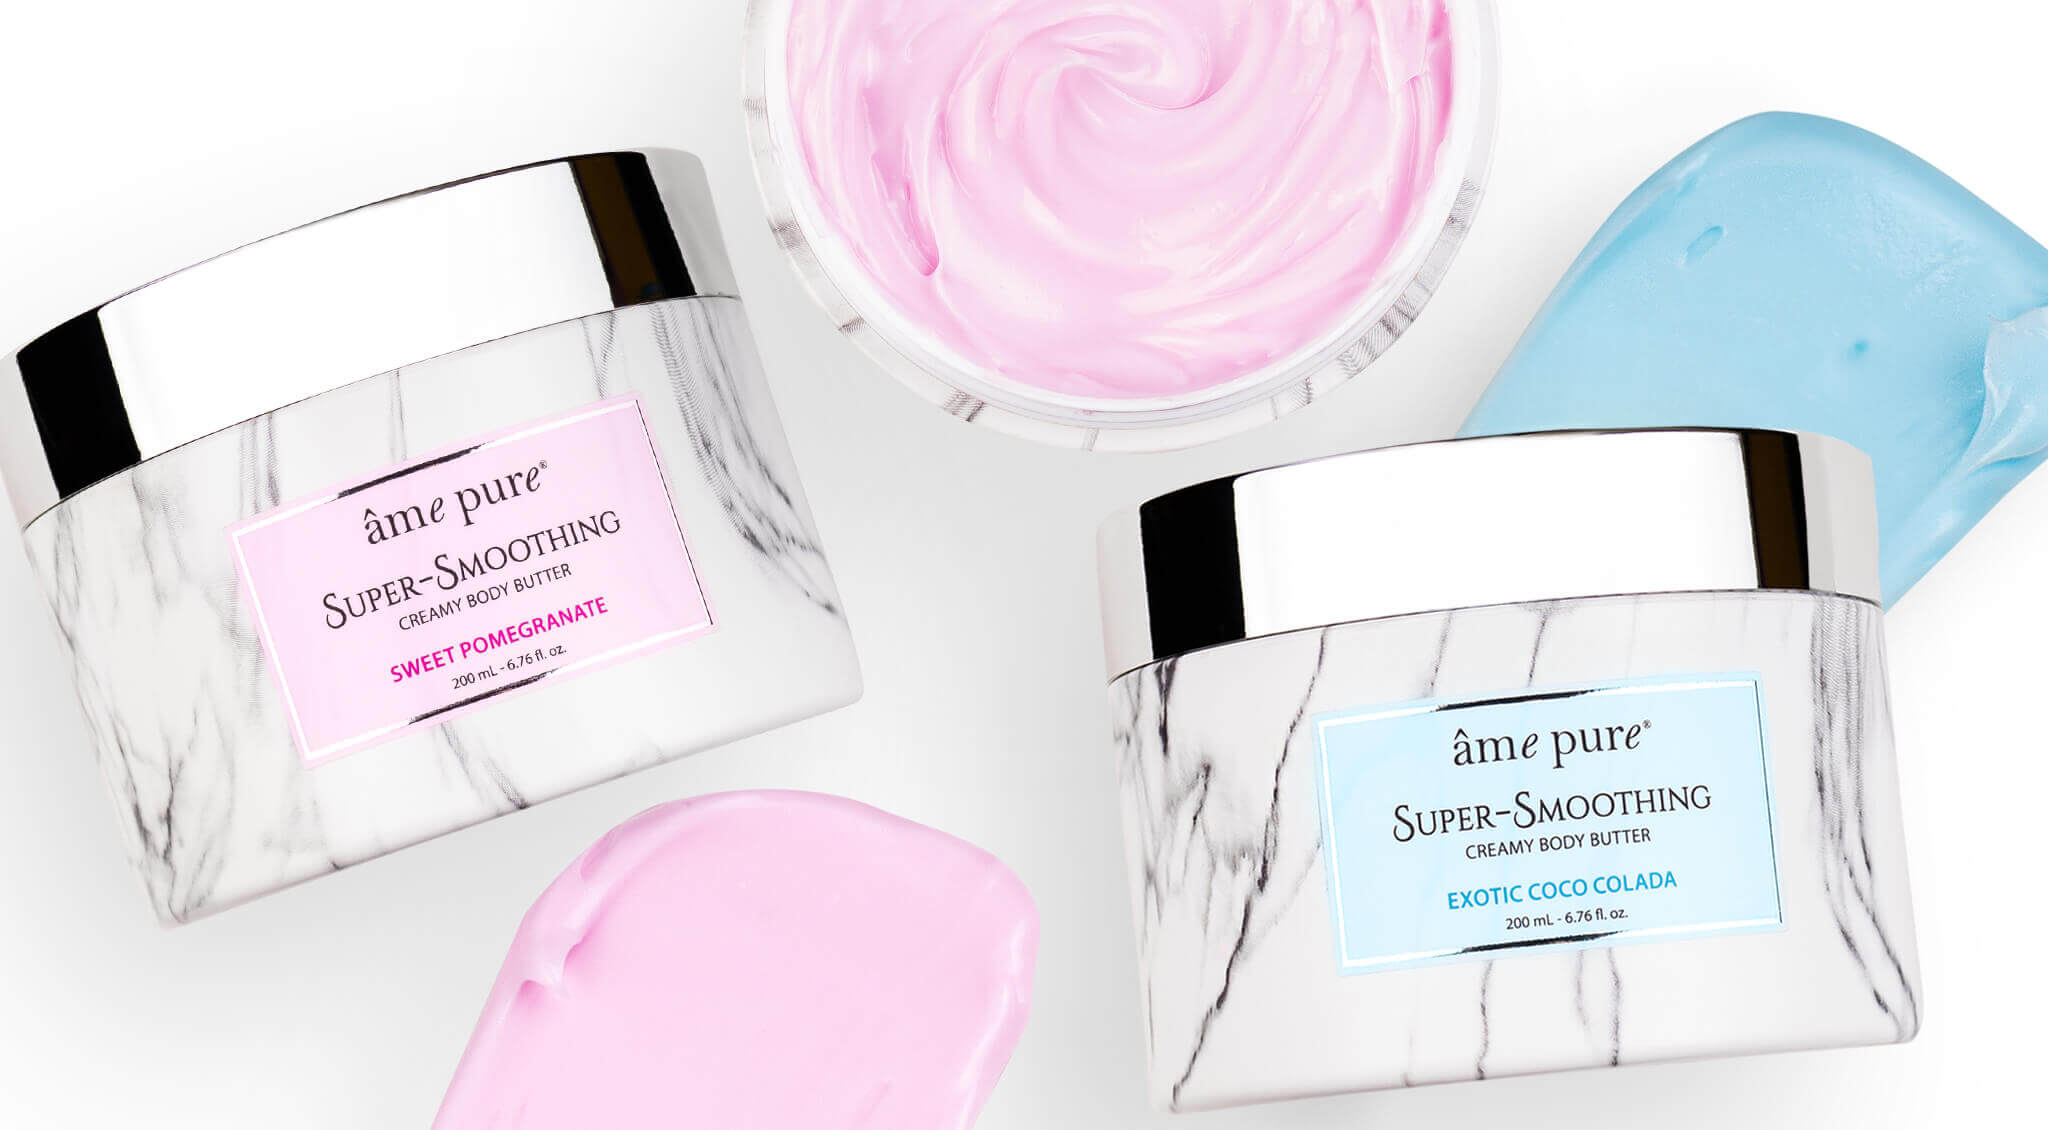 Super-Smoothing Body Butters